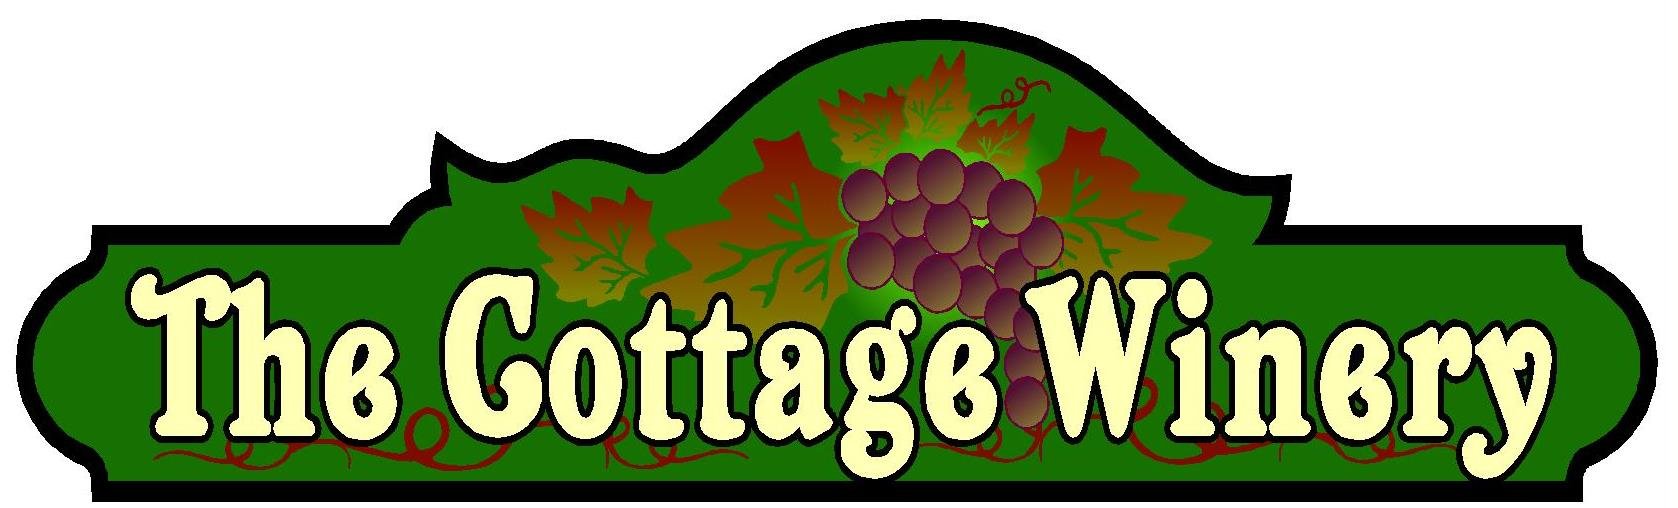 The Cottage Winery - logo.jpg